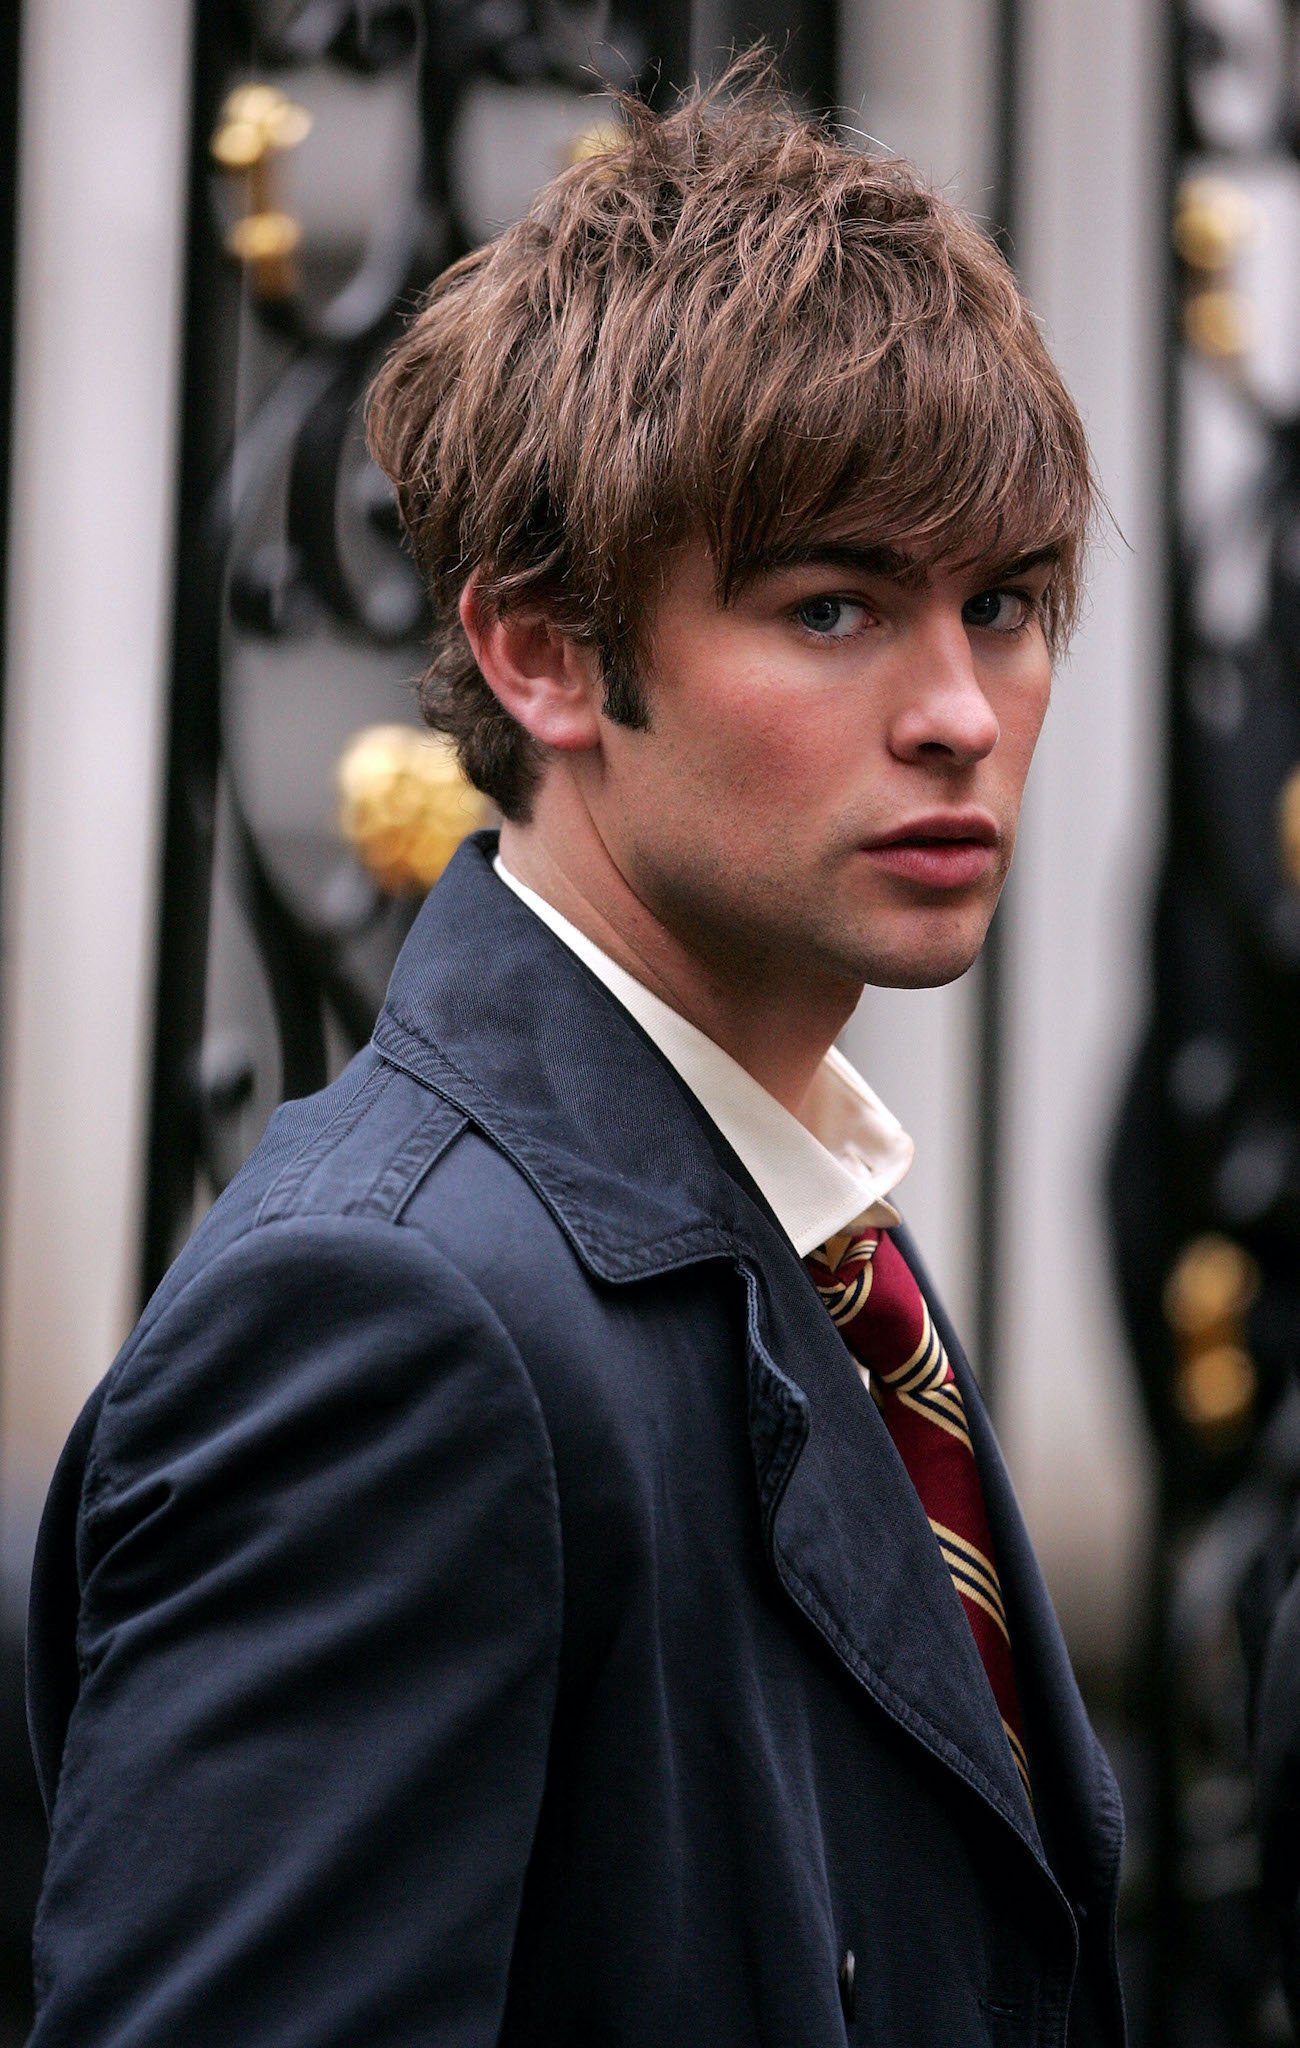 Chace Crawford Photo: Chace  Gossip girl nate, Gossip girl, Chace crawford